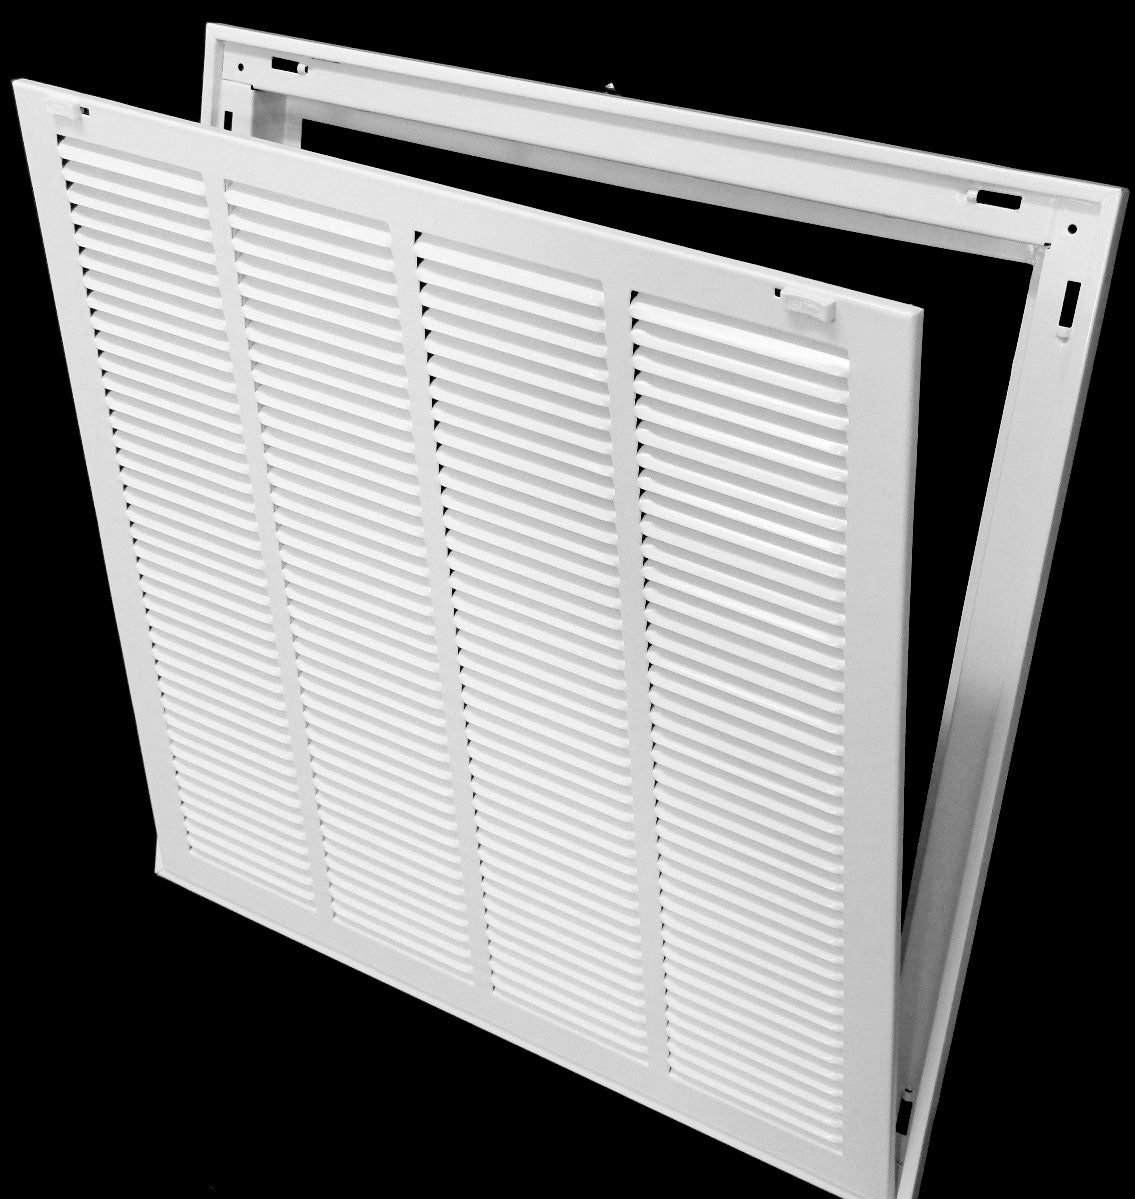 24&quot; X 18&quot; Steel Return Air Filter Grille for 1&quot; Filter - Removable Frame - [Outer Dimensions: 26 5/8&quot; X 20 5/8&quot;]